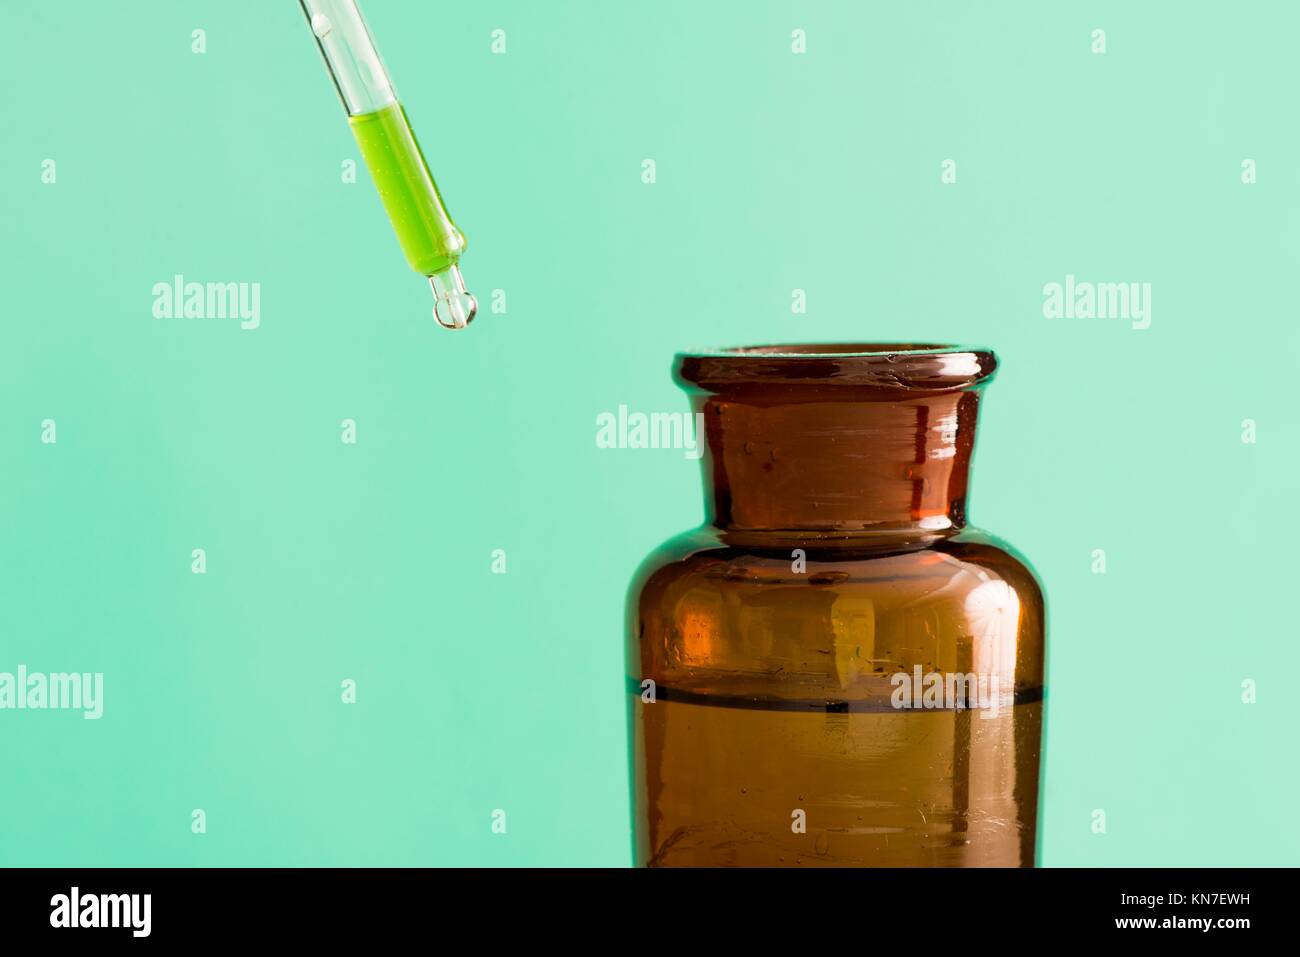 Old style medicine glass bottles. Concept of science research, healthcare and laboratory tests. Stock Photo